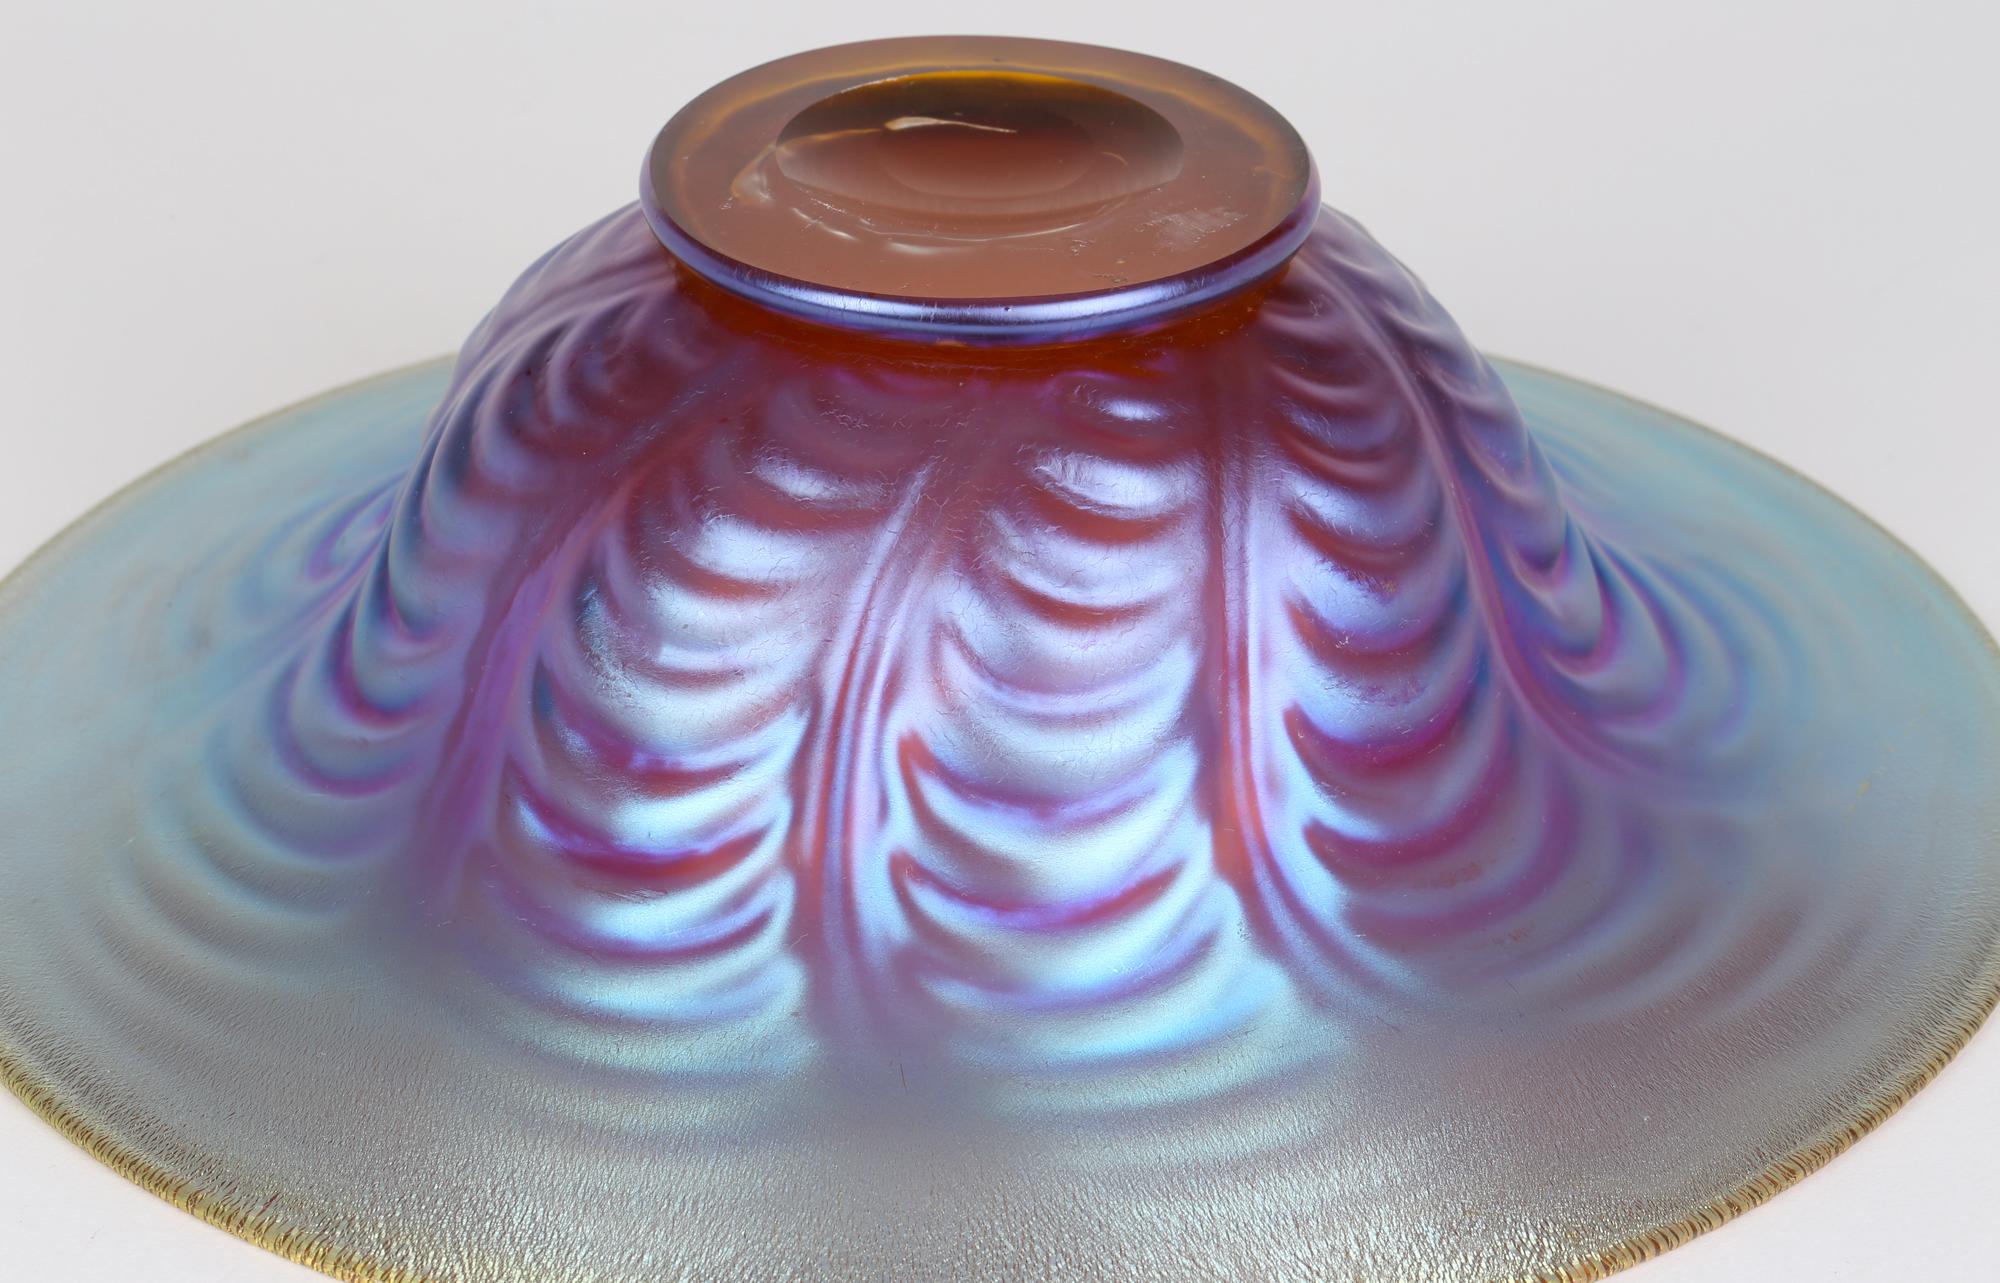 Stunning German Art Deco Myra Kristal art glass bowl by Karl Wiedmann for WMF (Würtemburgische Metallwaren Fabrik) and made between 1926 and 1936. This large and striking hand-blown amber glass bowl stands on a round narrow foot with relief molded